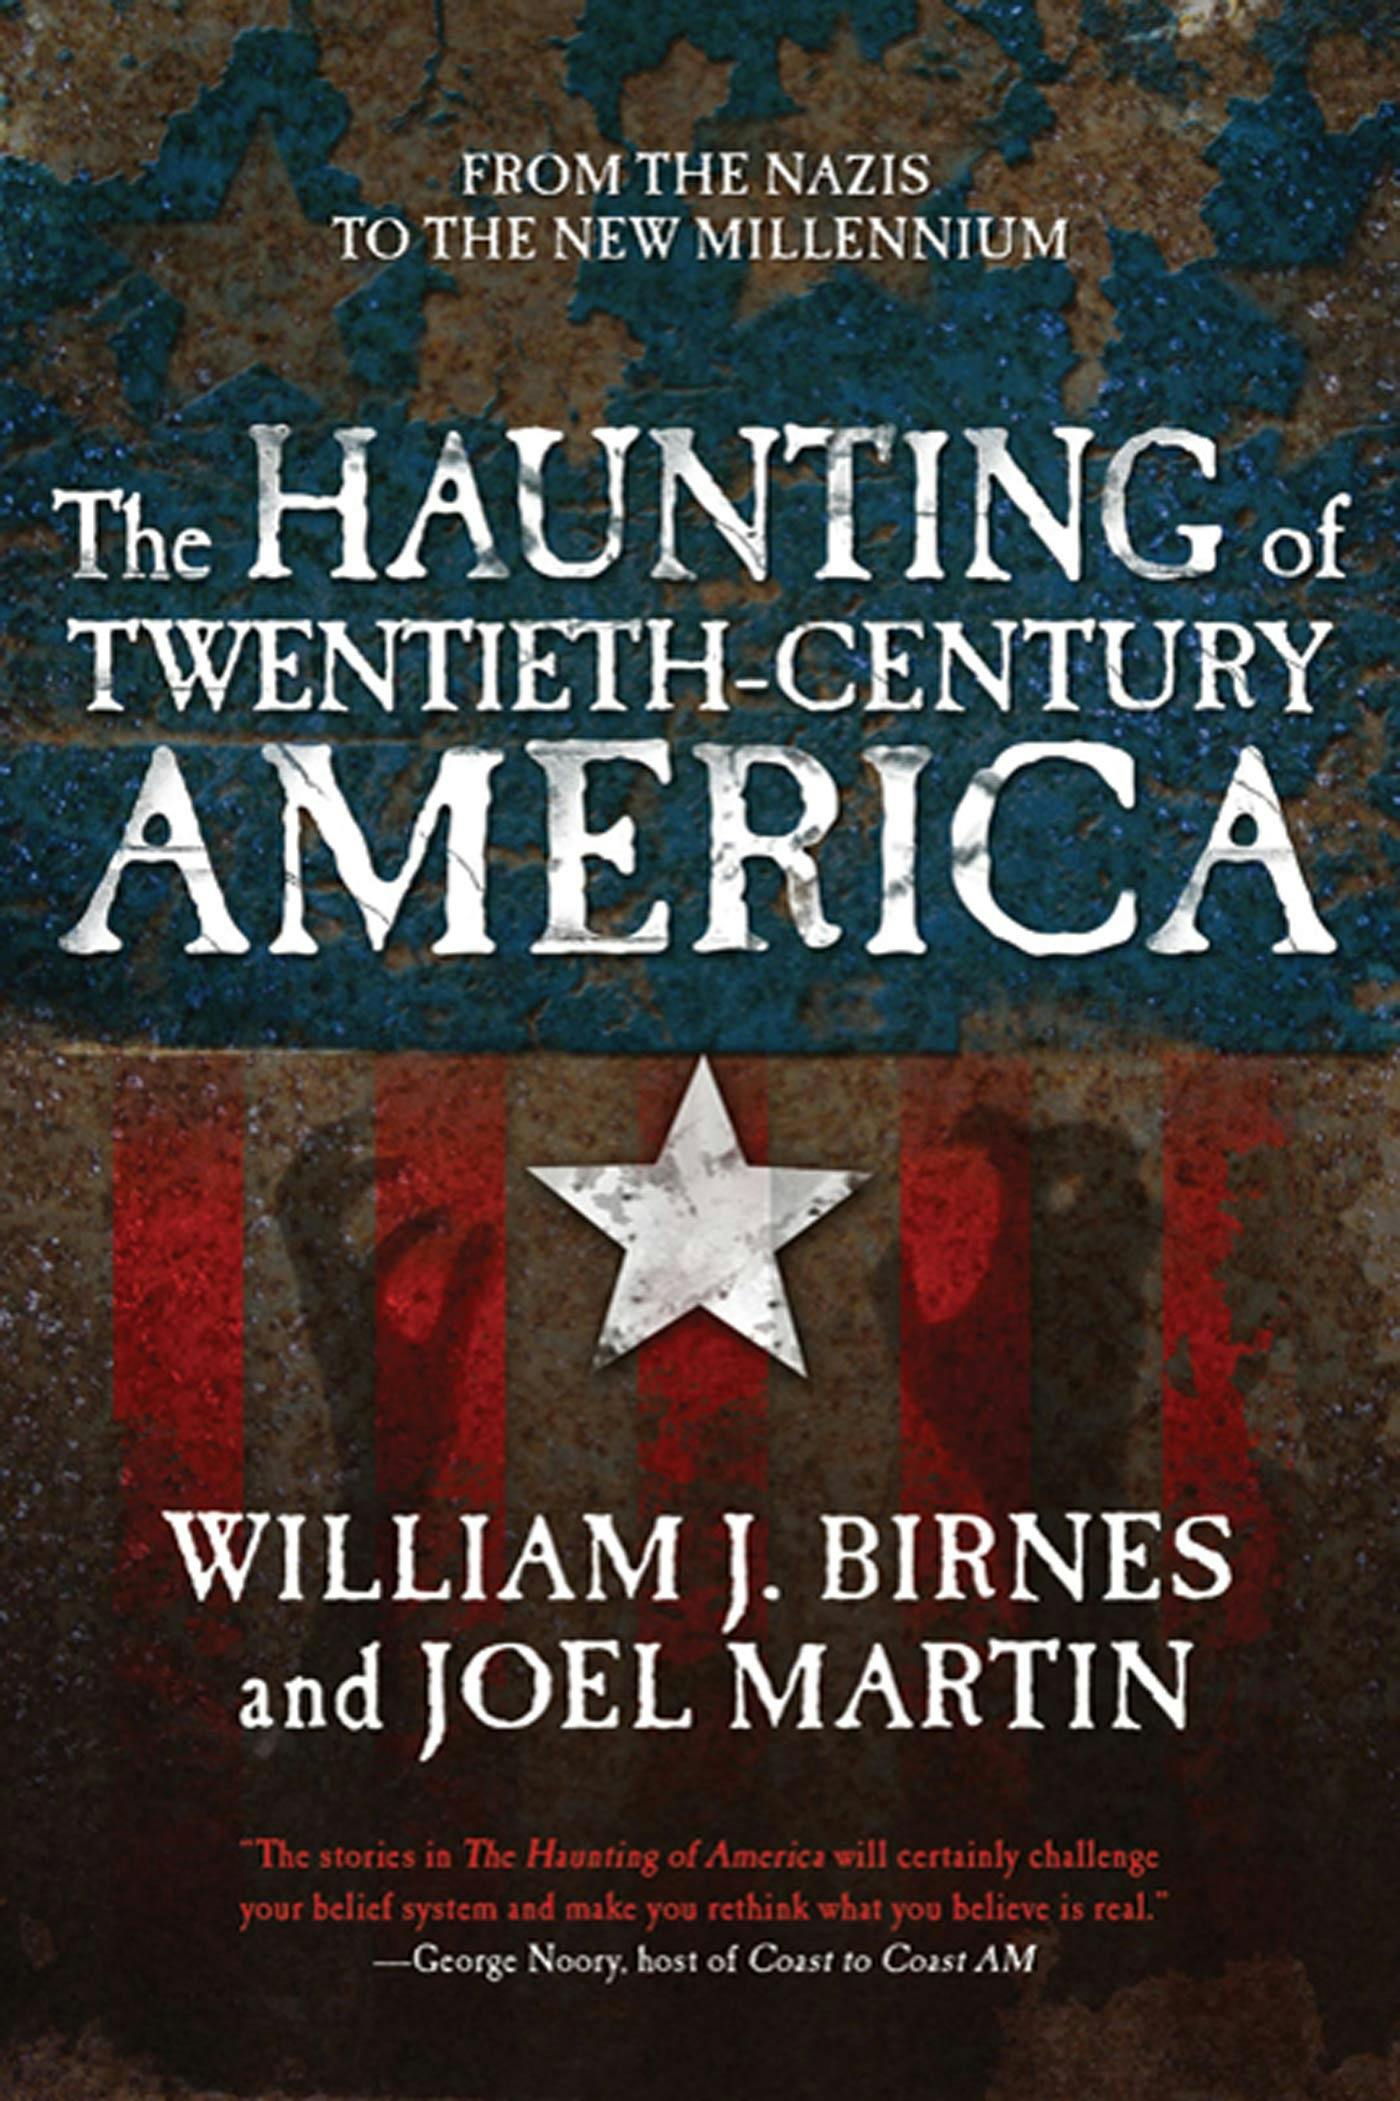 Cover for the book titled as: The Haunting of Twentieth-Century America